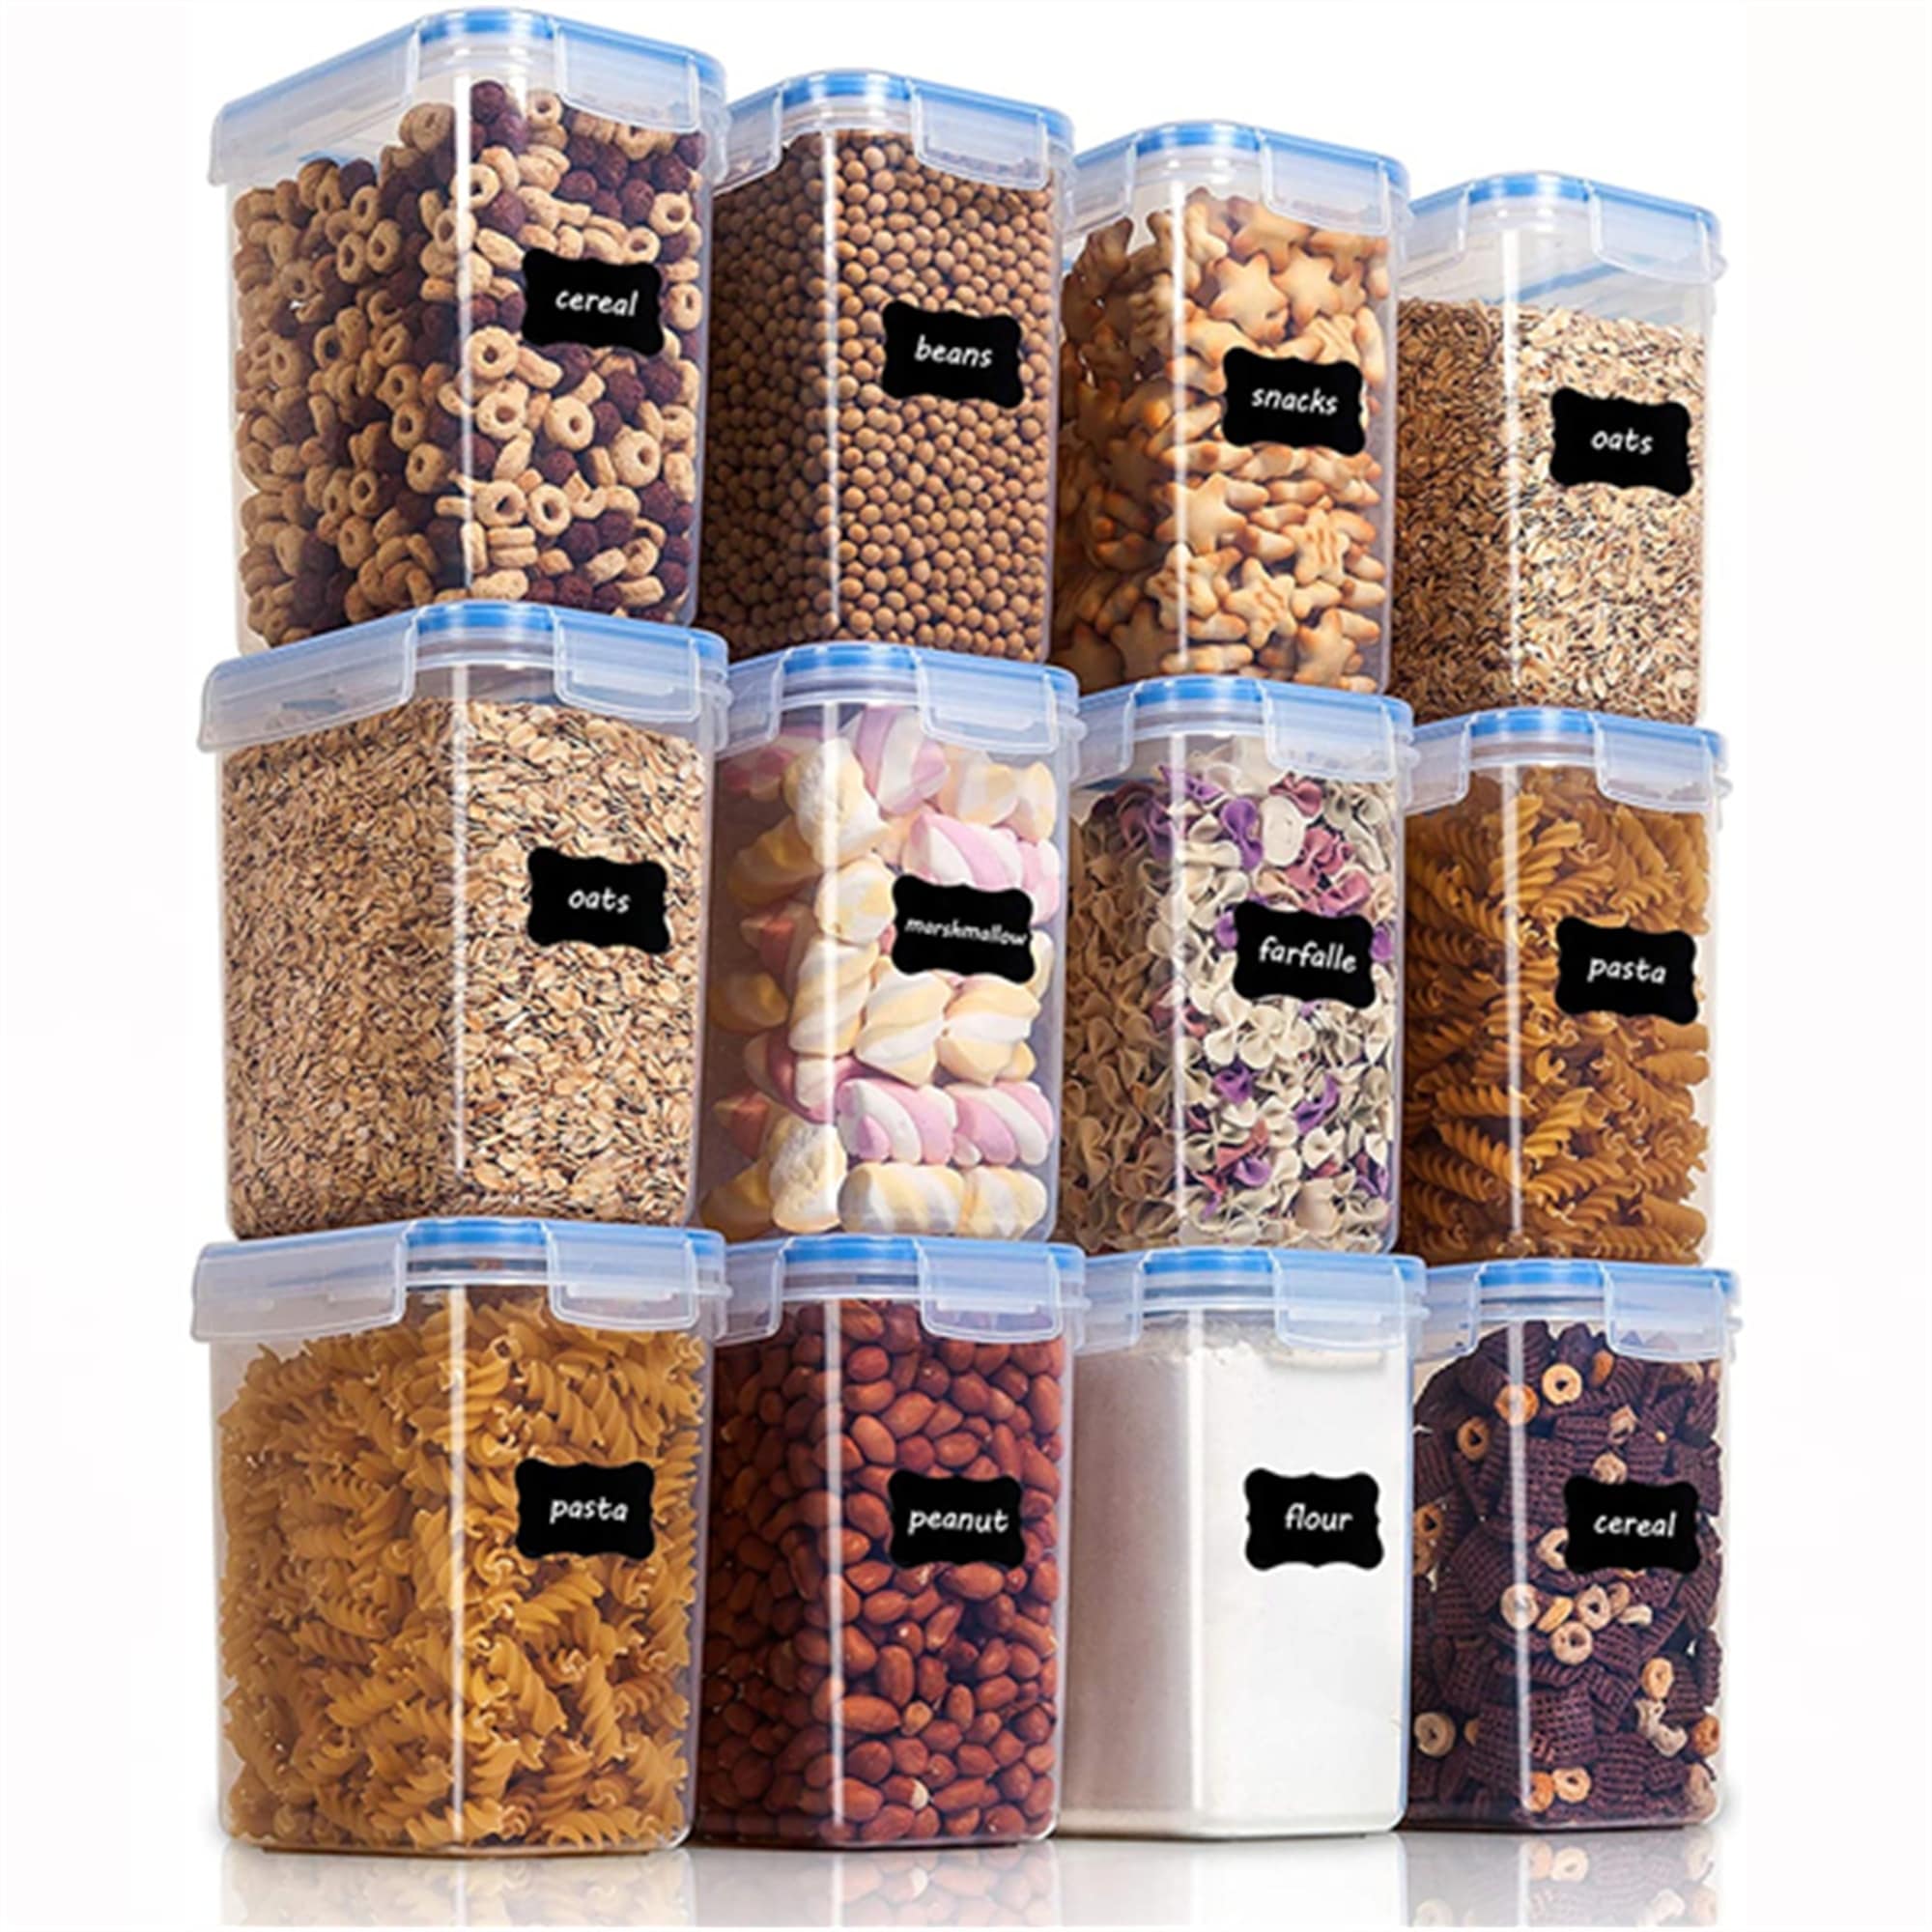 Airtight Food Storage Containers with Lids for Kitchen Organization (20  Pack/1.6 Liters Each) - Plastic Kitchen Storage Containers for Organizing